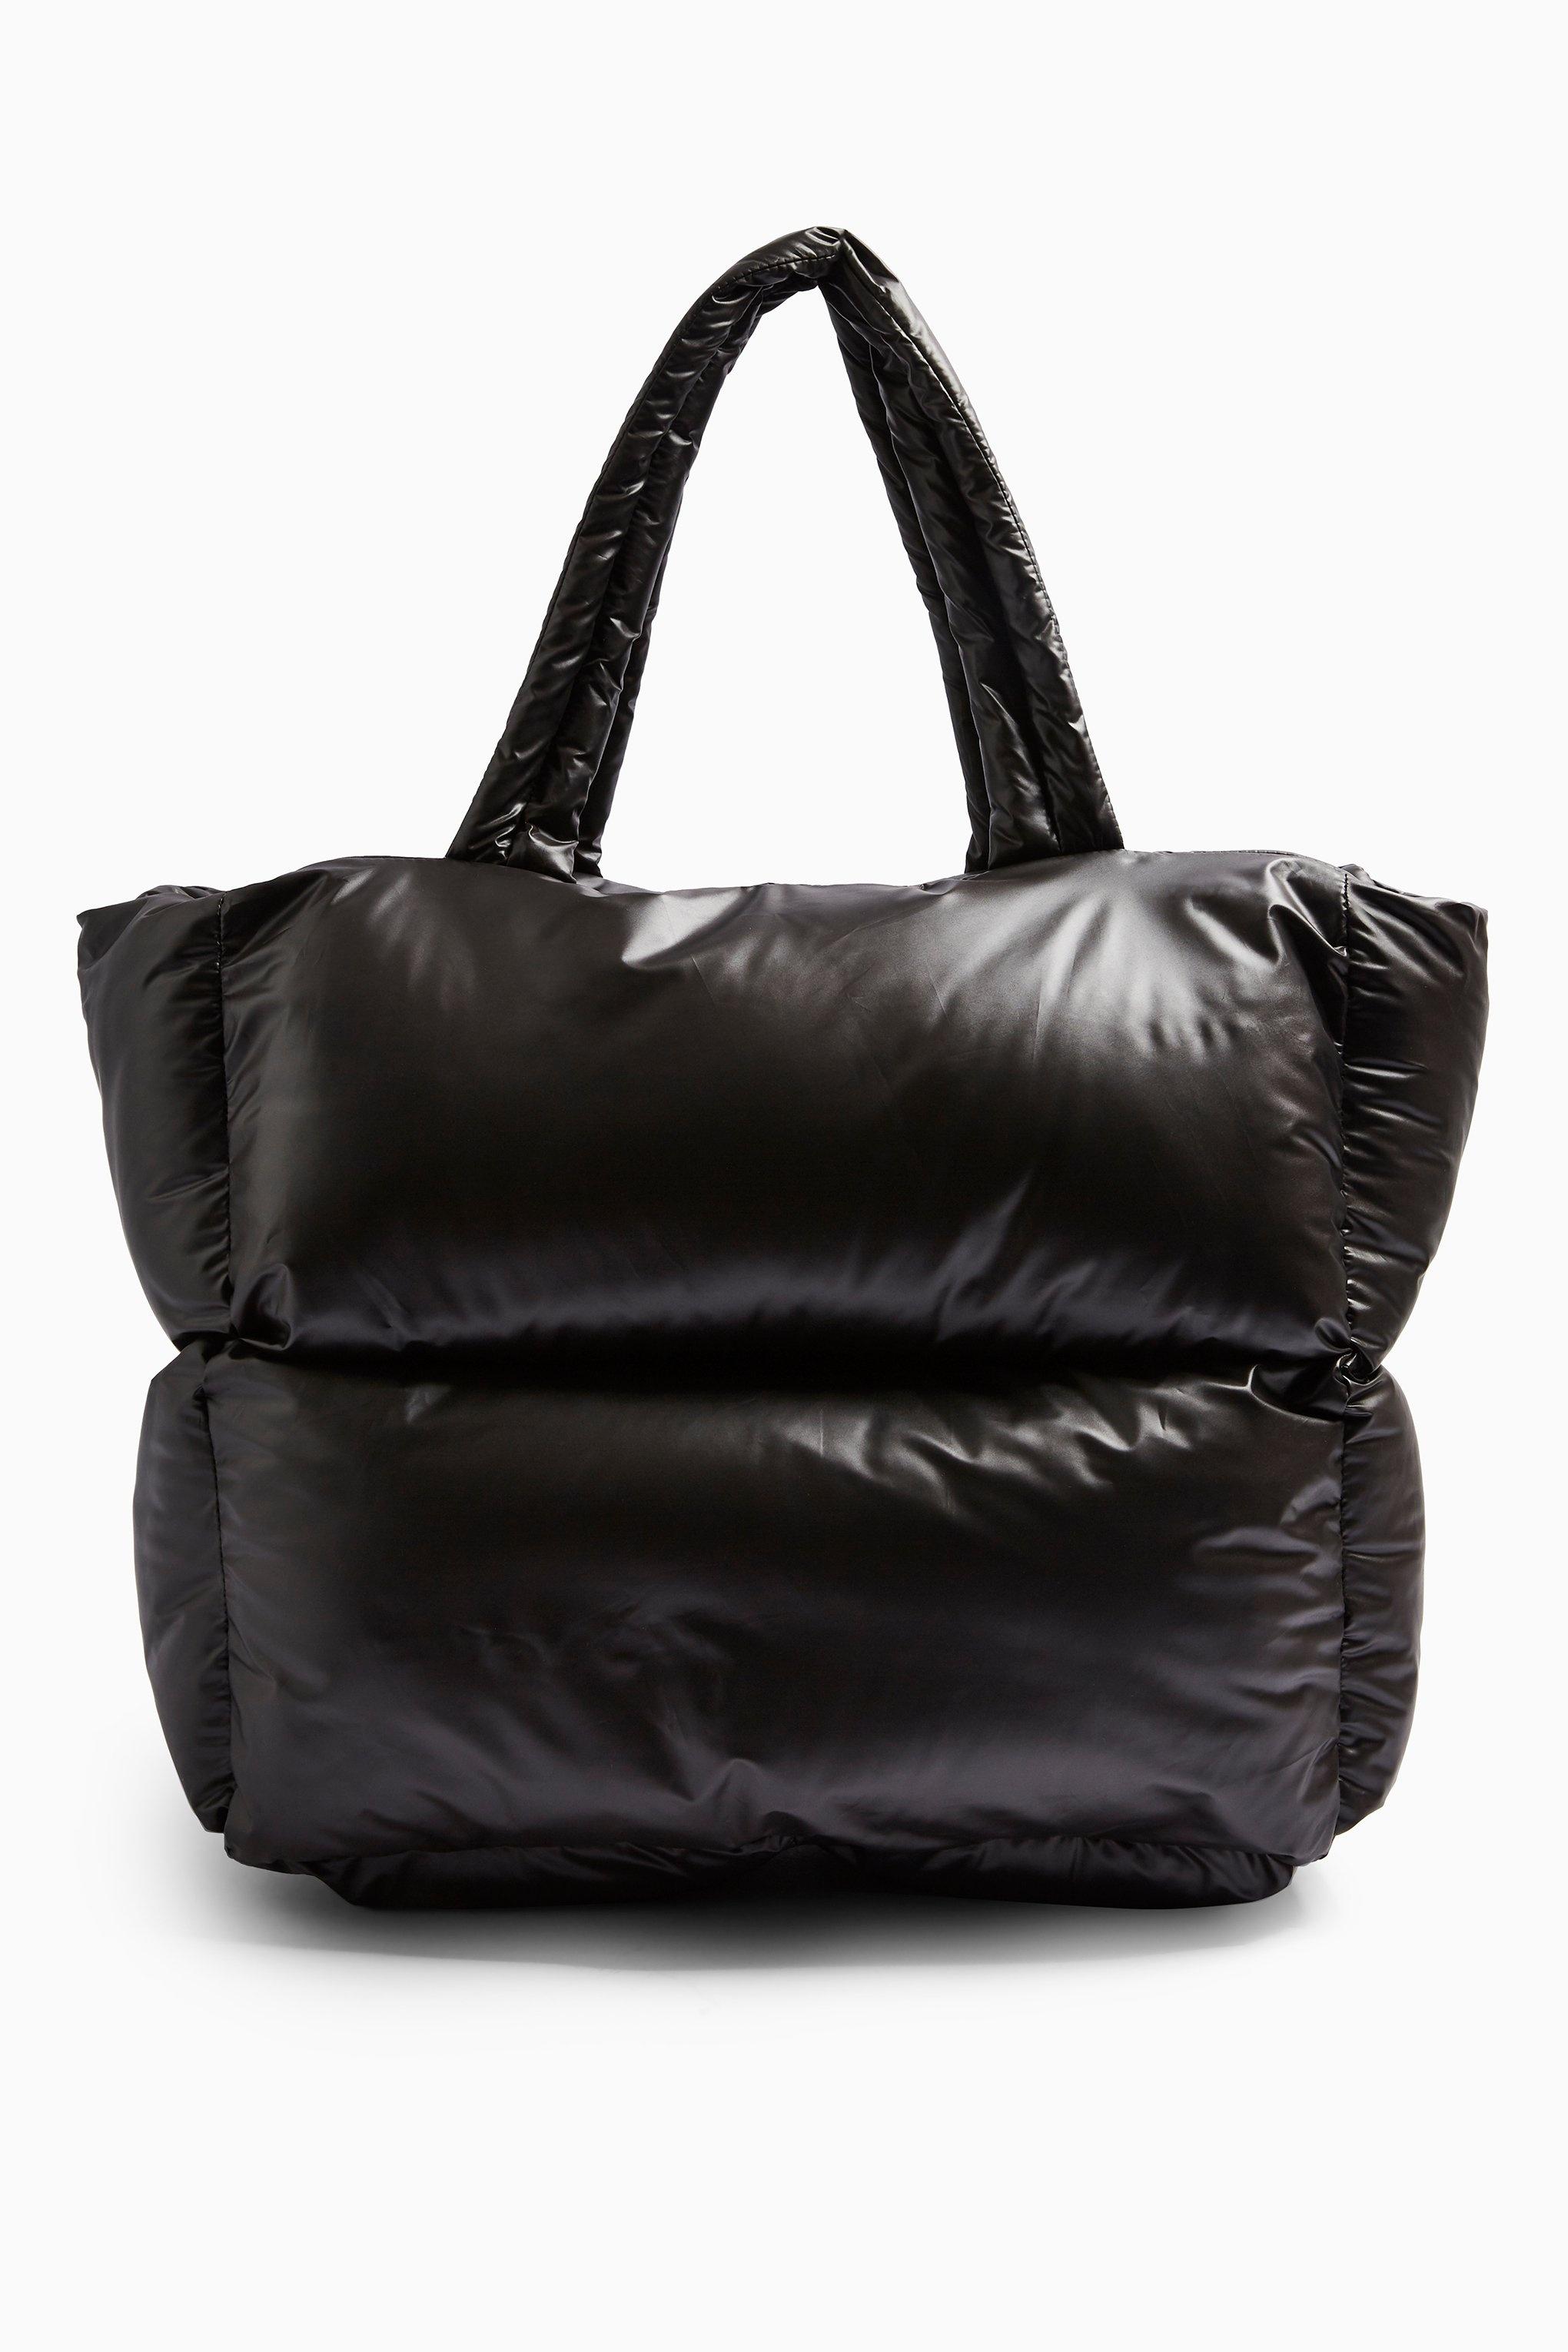 TOPSHOP Synthetic Considered Casa Black Puffer Tote Bag - Lyst